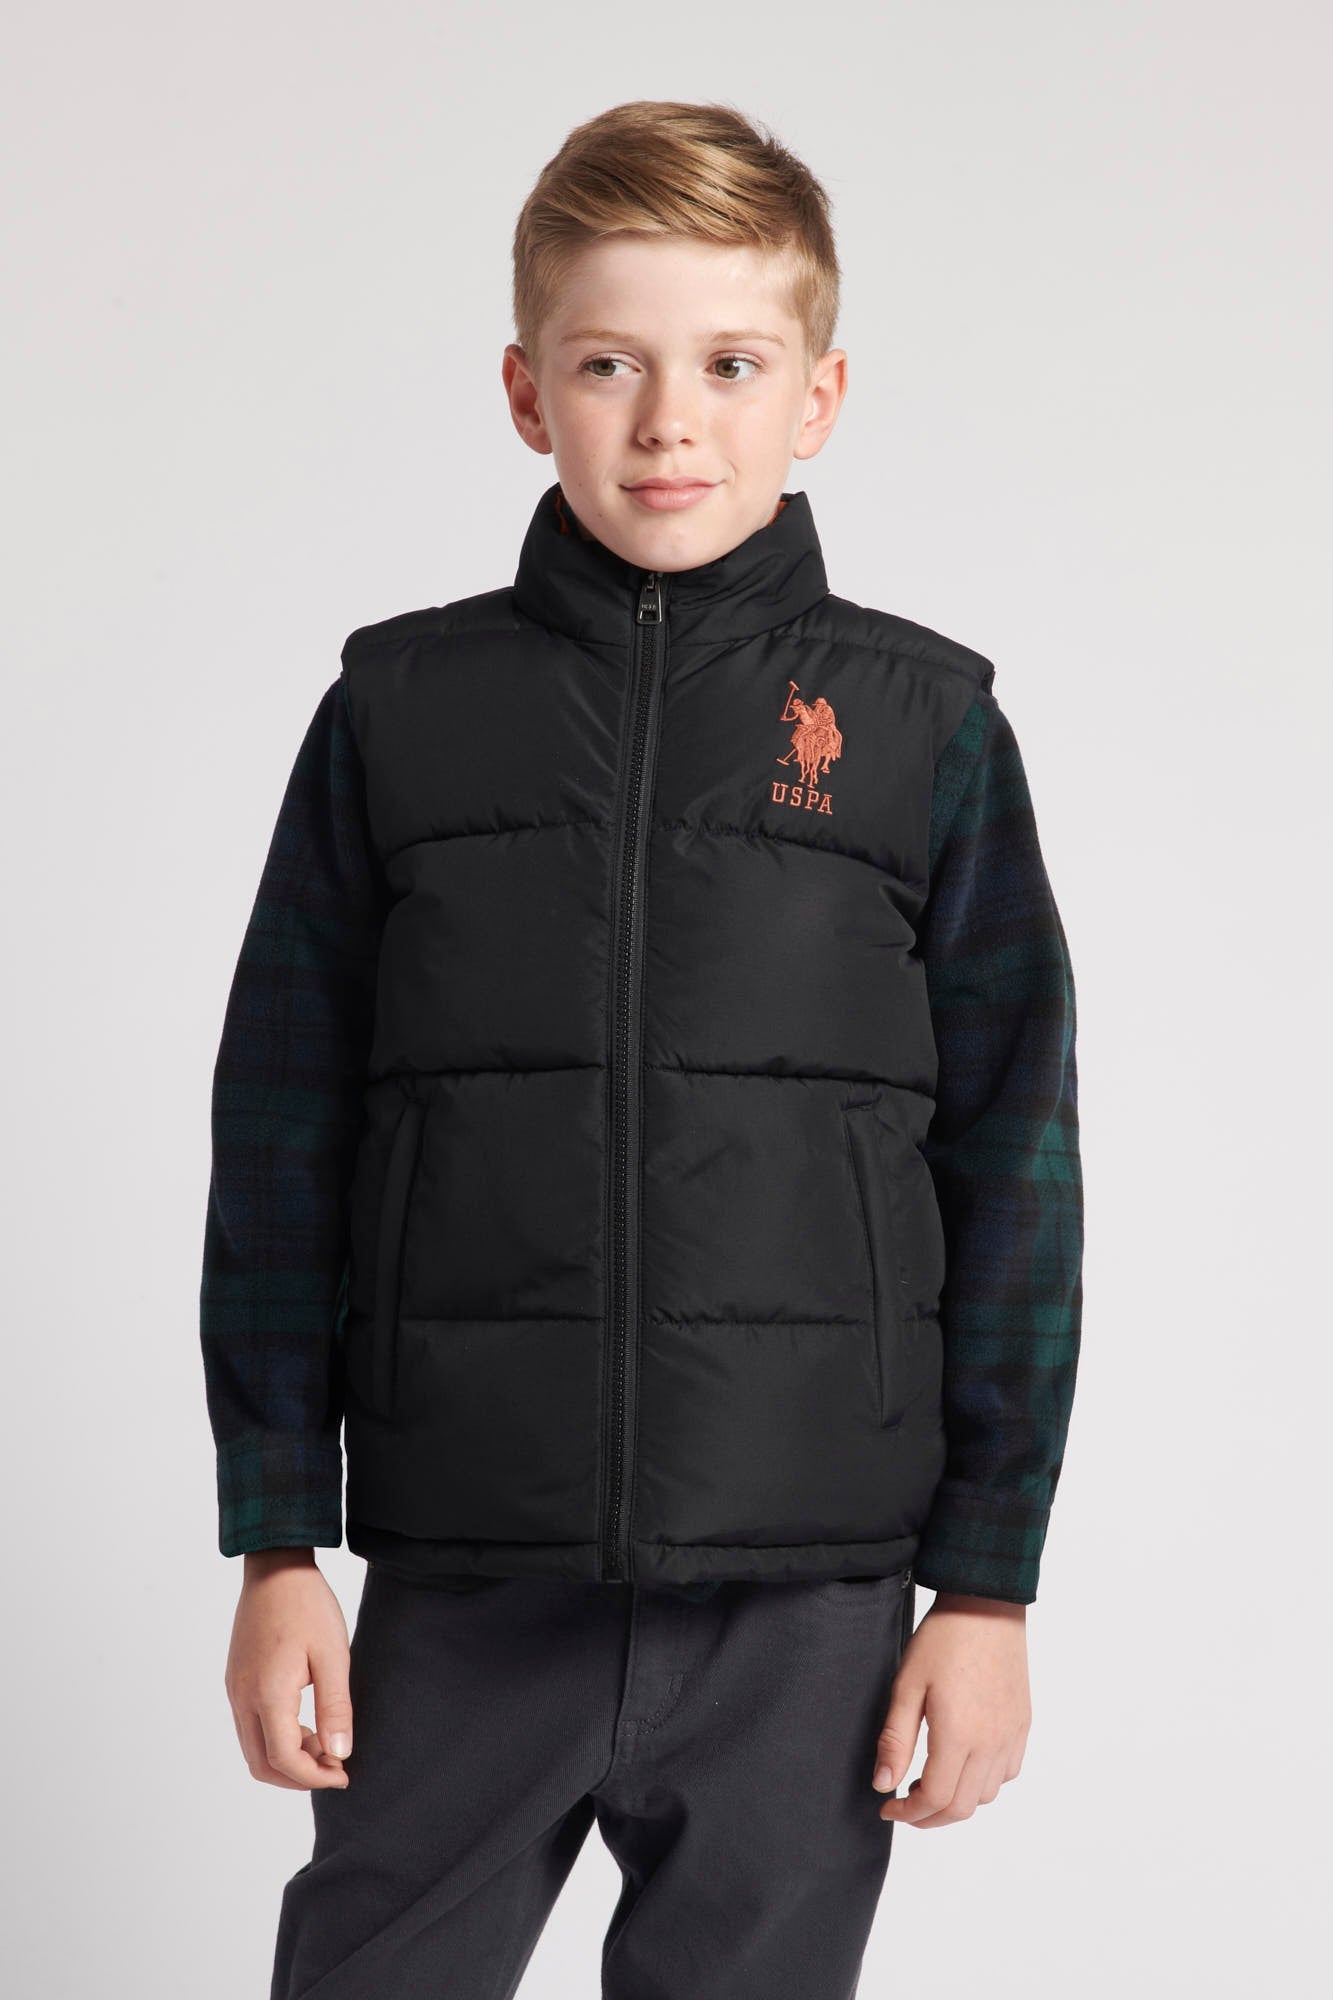 U.S. Polo Assn. Boys Thick Quilted Gilet in Black